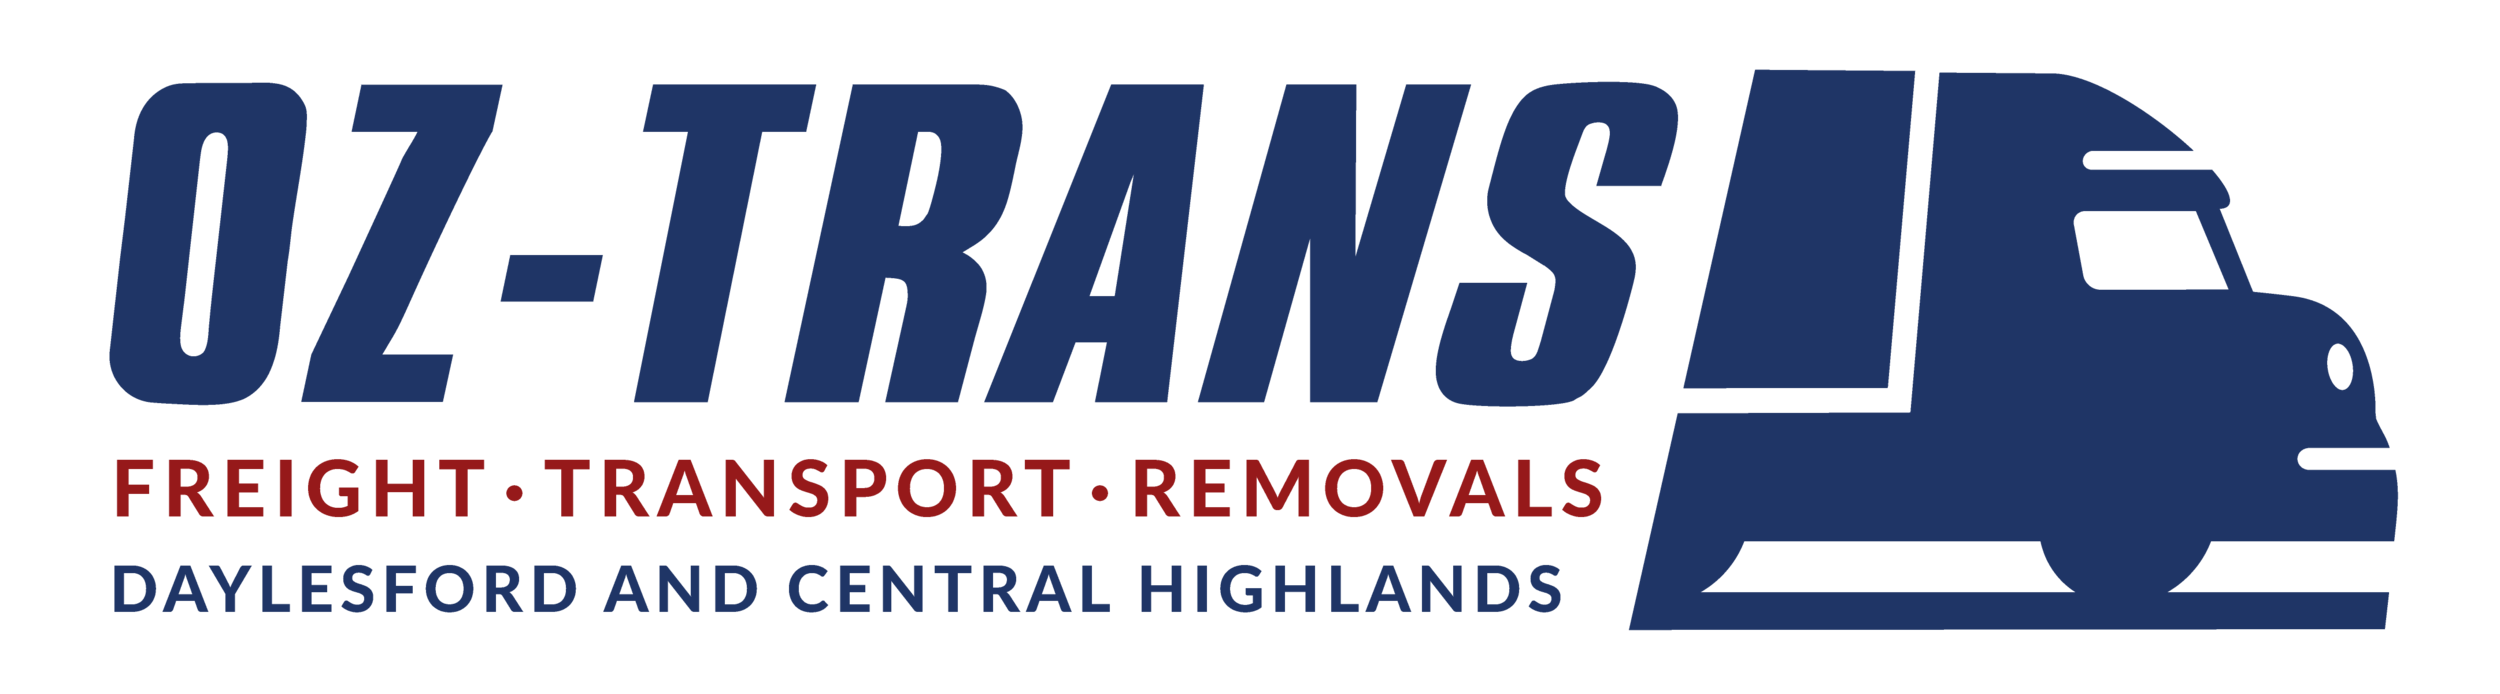 Oz-Trans | Freight Logistics Removals | Daylesford and Central Victoria